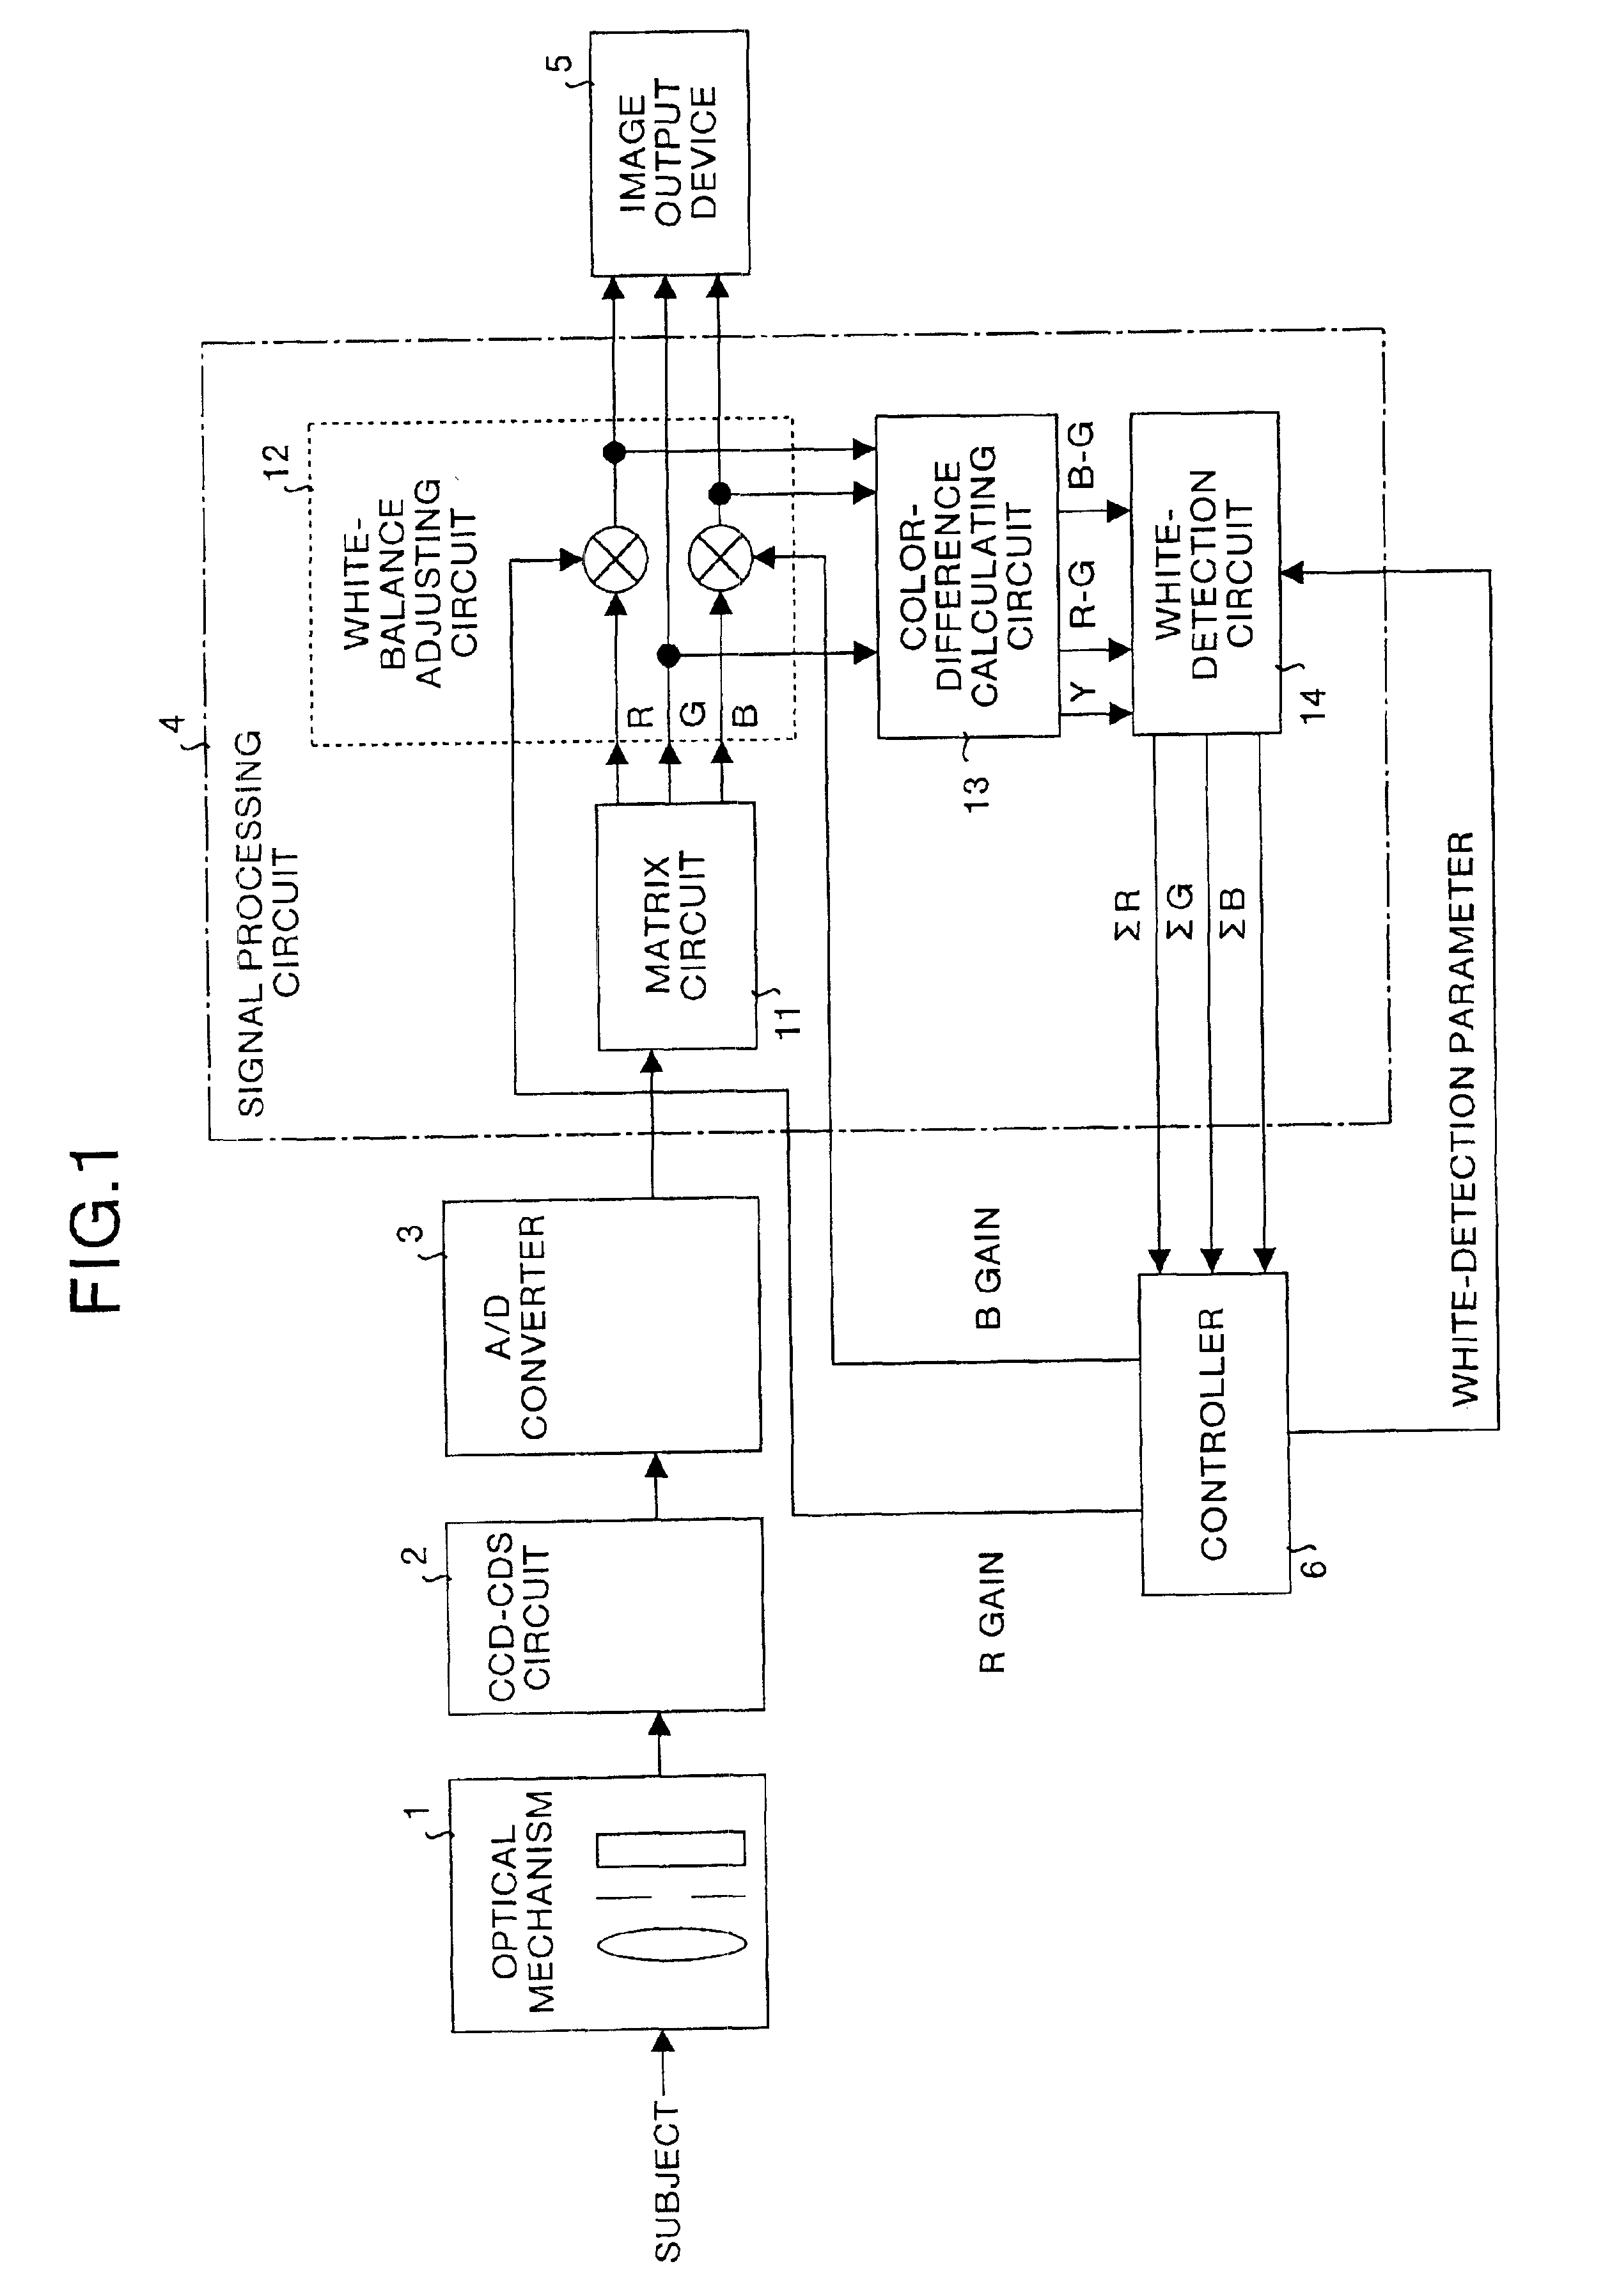 Device for image processing, method of adjusting white-balance, and computer products